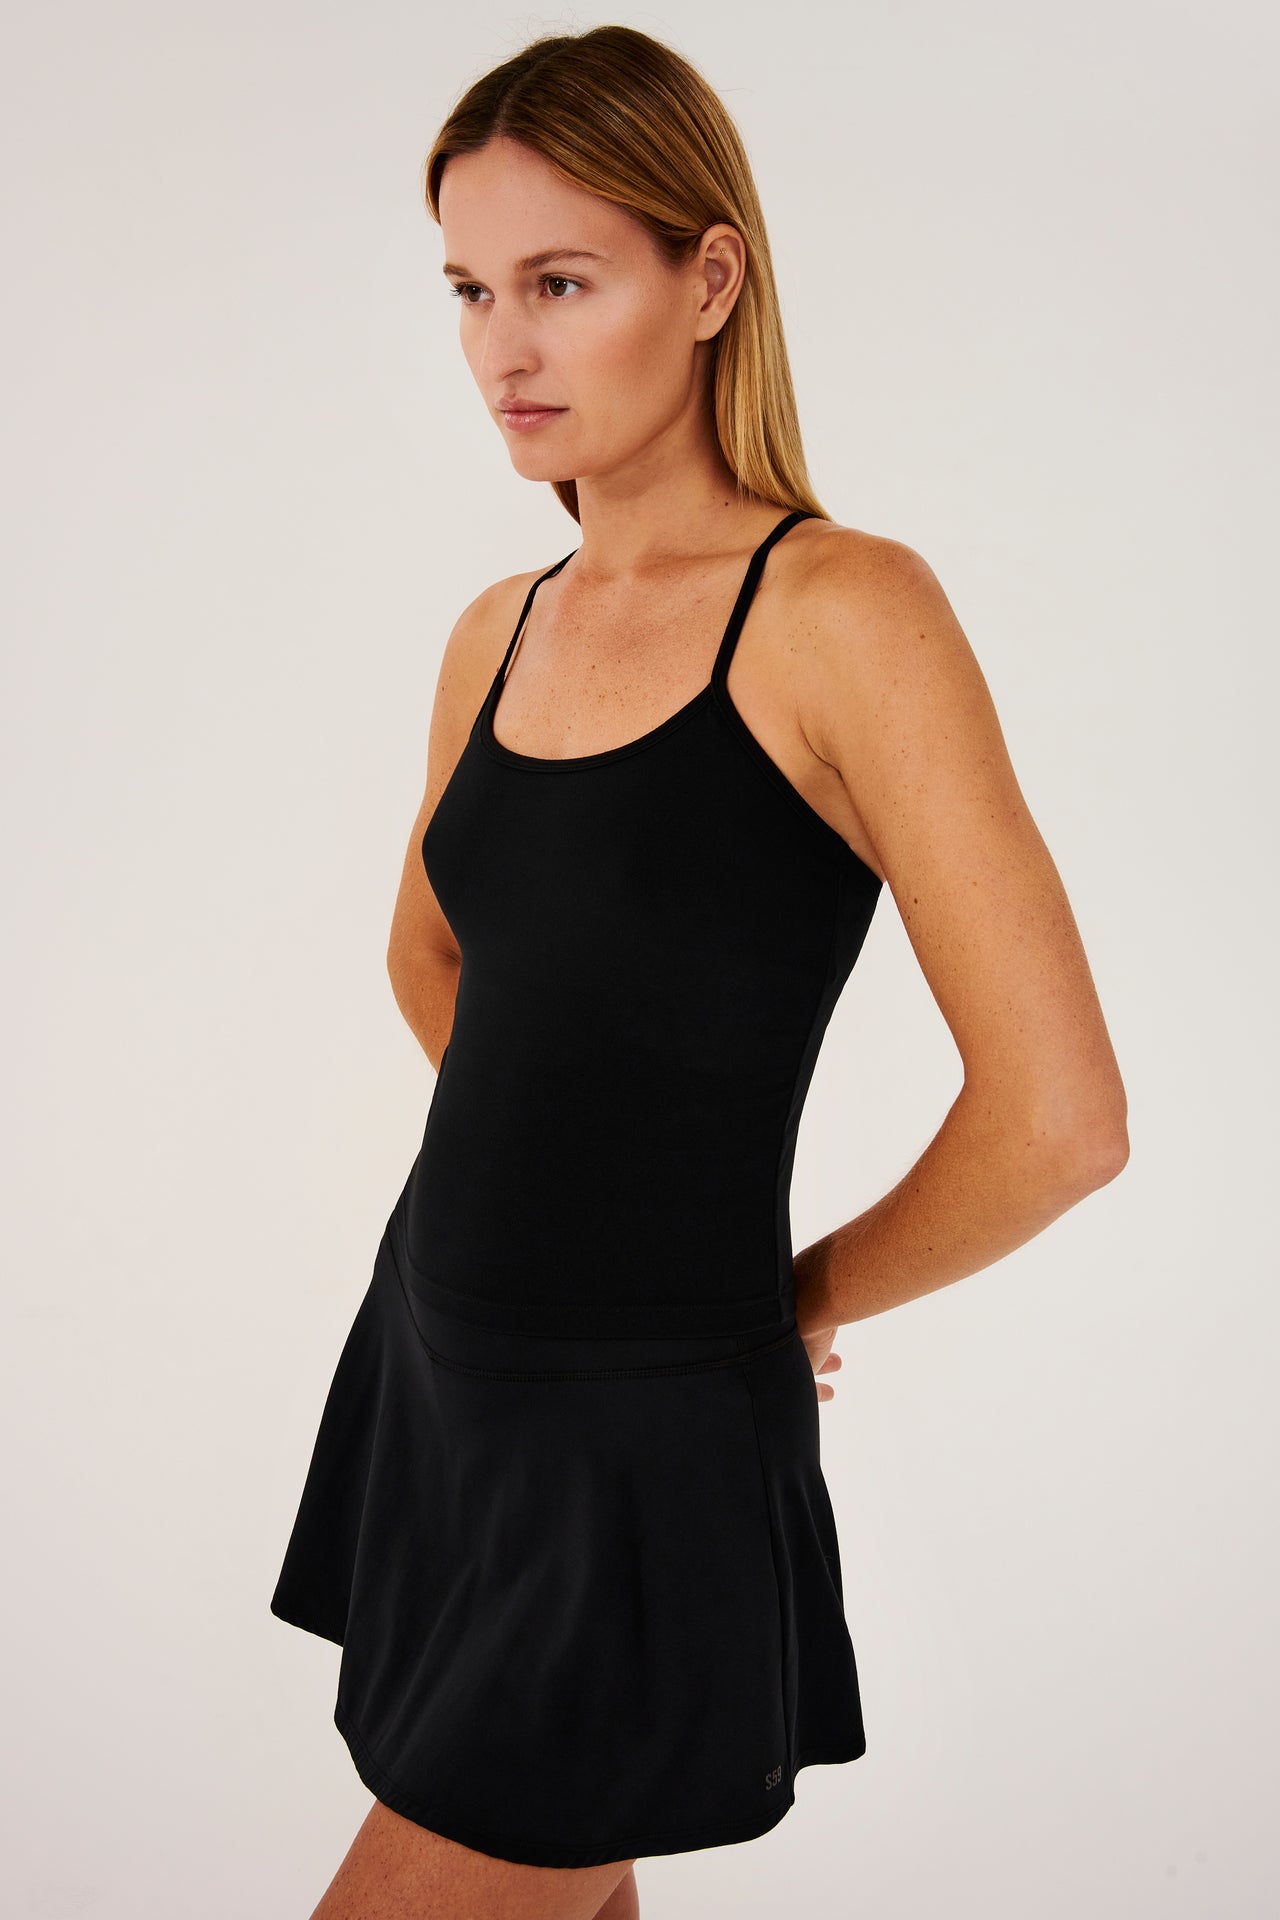 Side view of girl wearing black spaghetti strap tank top with black skirt